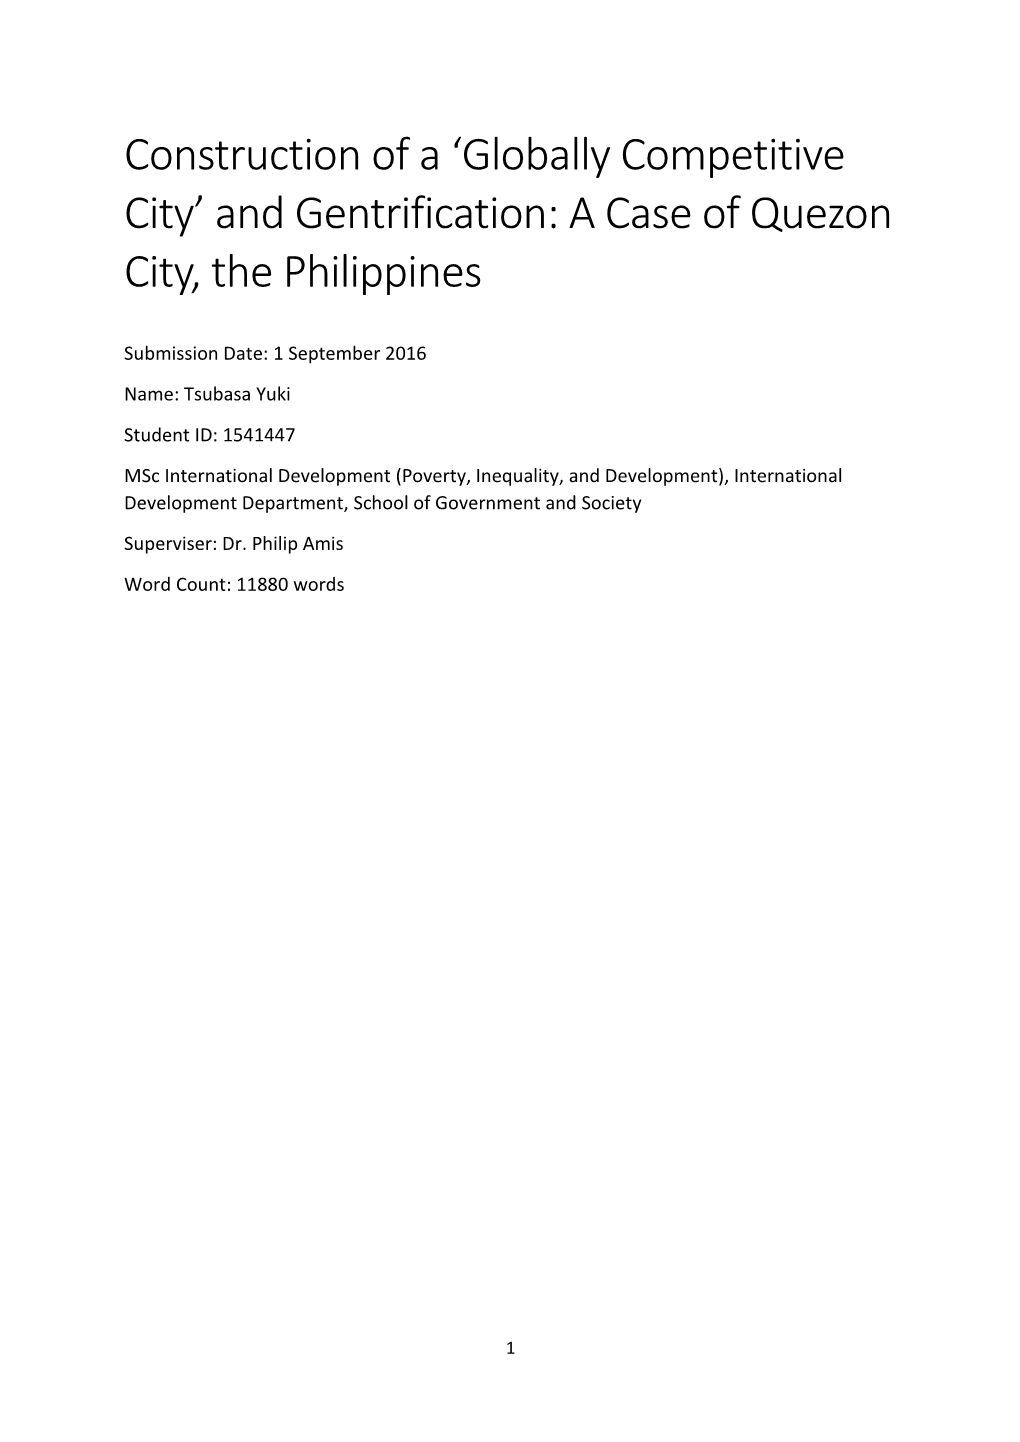 And Gentrification: a Case of Quezon City, the Philippines